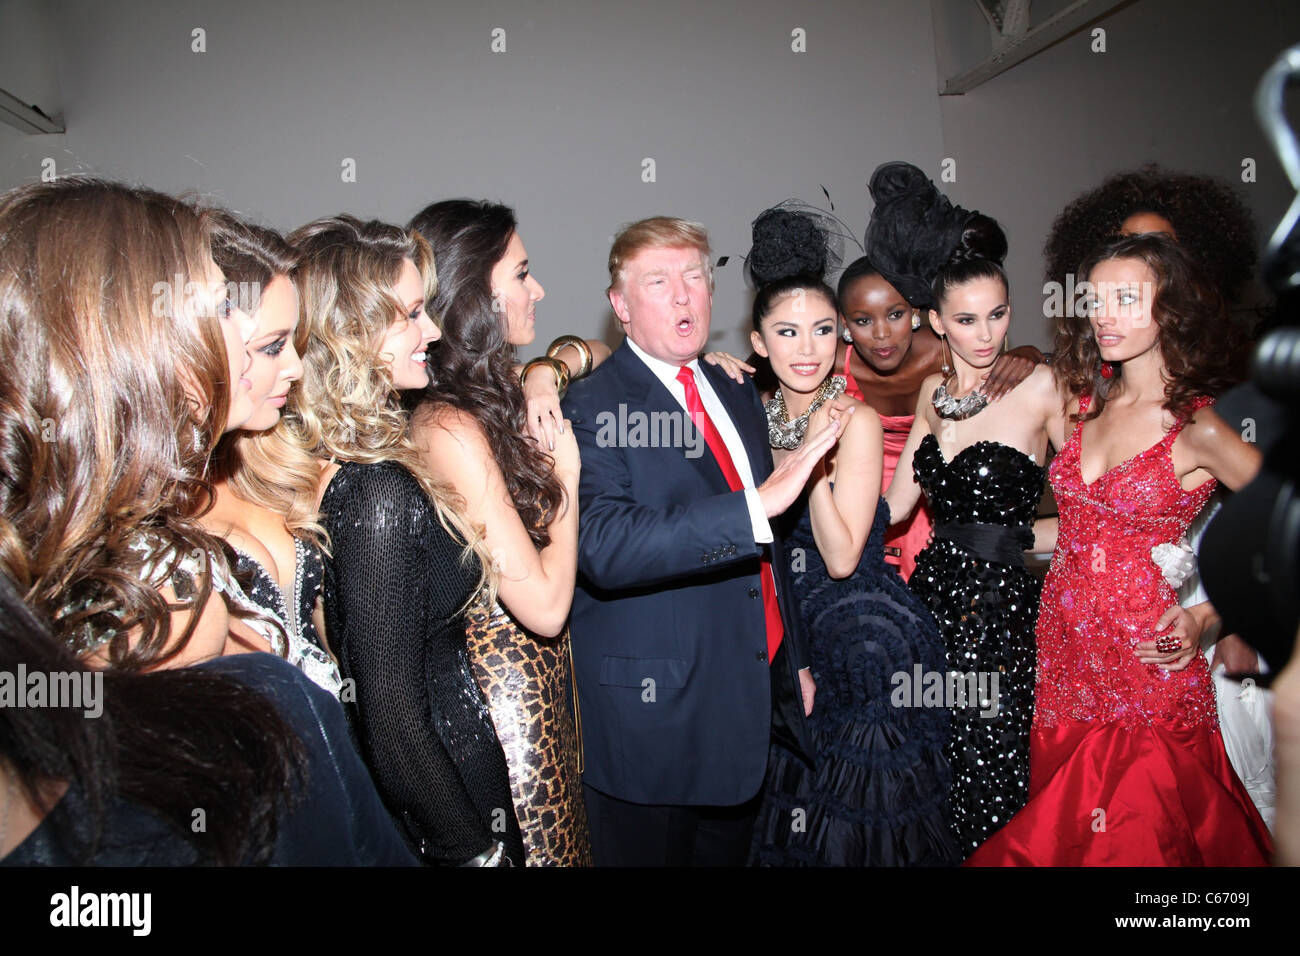 Donald Trump and Famous Former Miss Universe Beauty Queens at the press conference for Donald Trump Miss Universe Beauty Queen Photo Shoot, Chelsea Piers, Pier 59, New York, NY July 27, 2011. Photo By: Andres Otero/Everett Collection Stock Photo